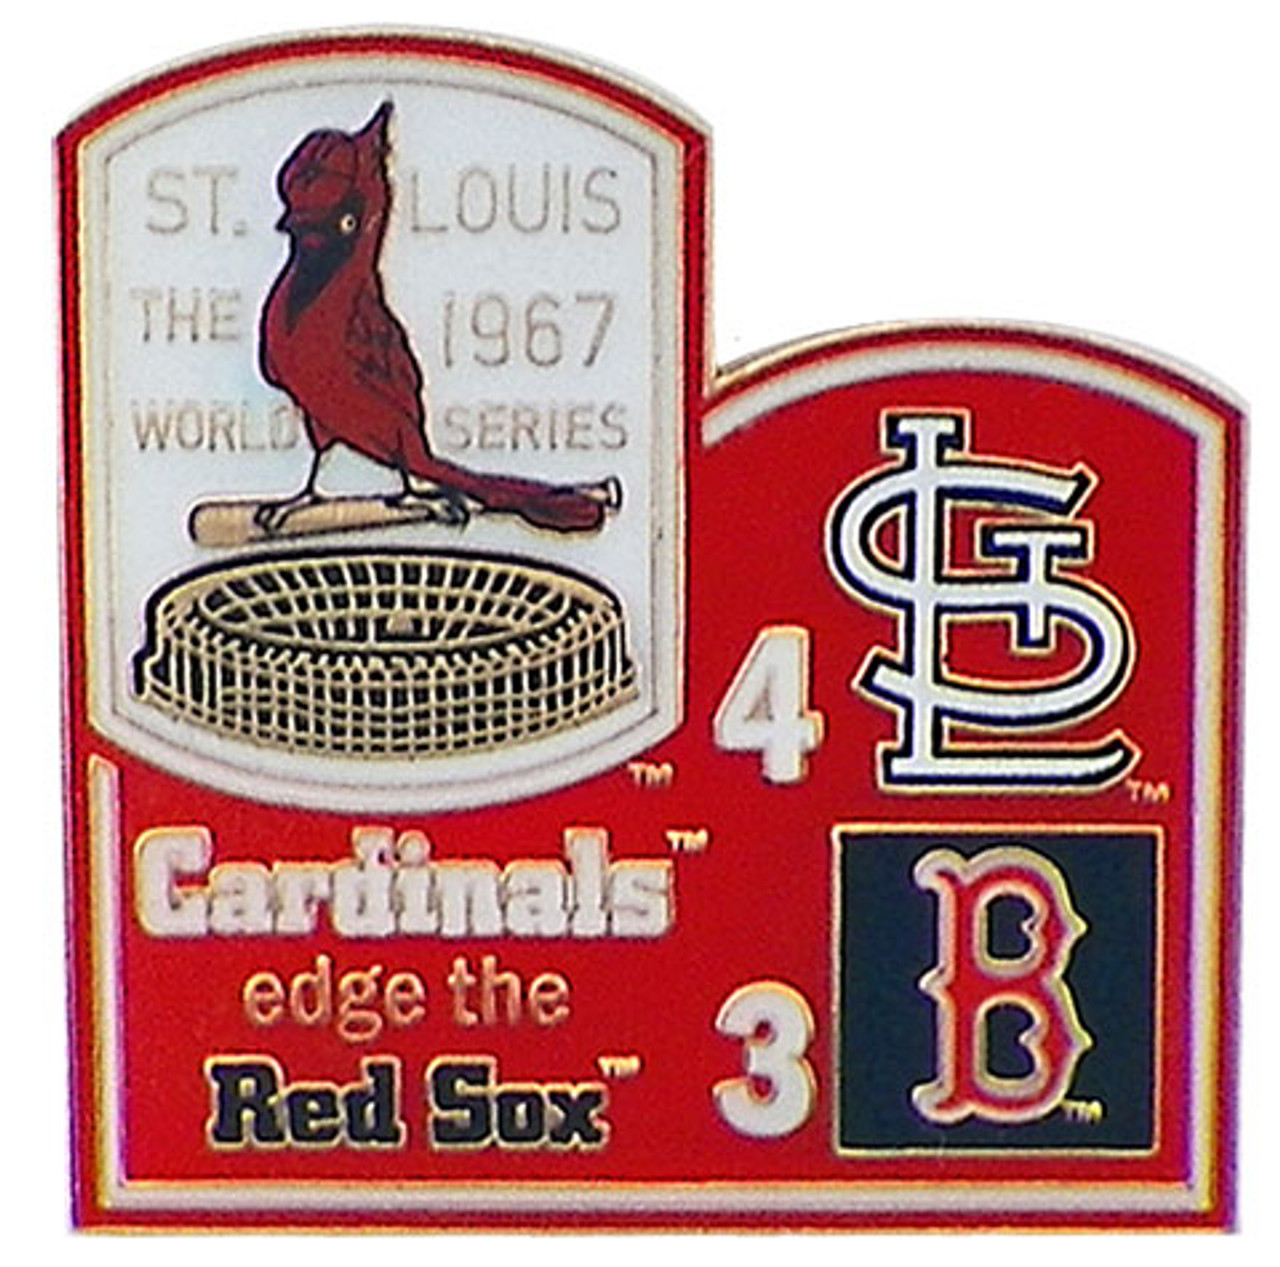 2004 MLB World Series Logo Jersey Patch St. Louis Cardinals vs. Boston Red Sox by Patch Collection